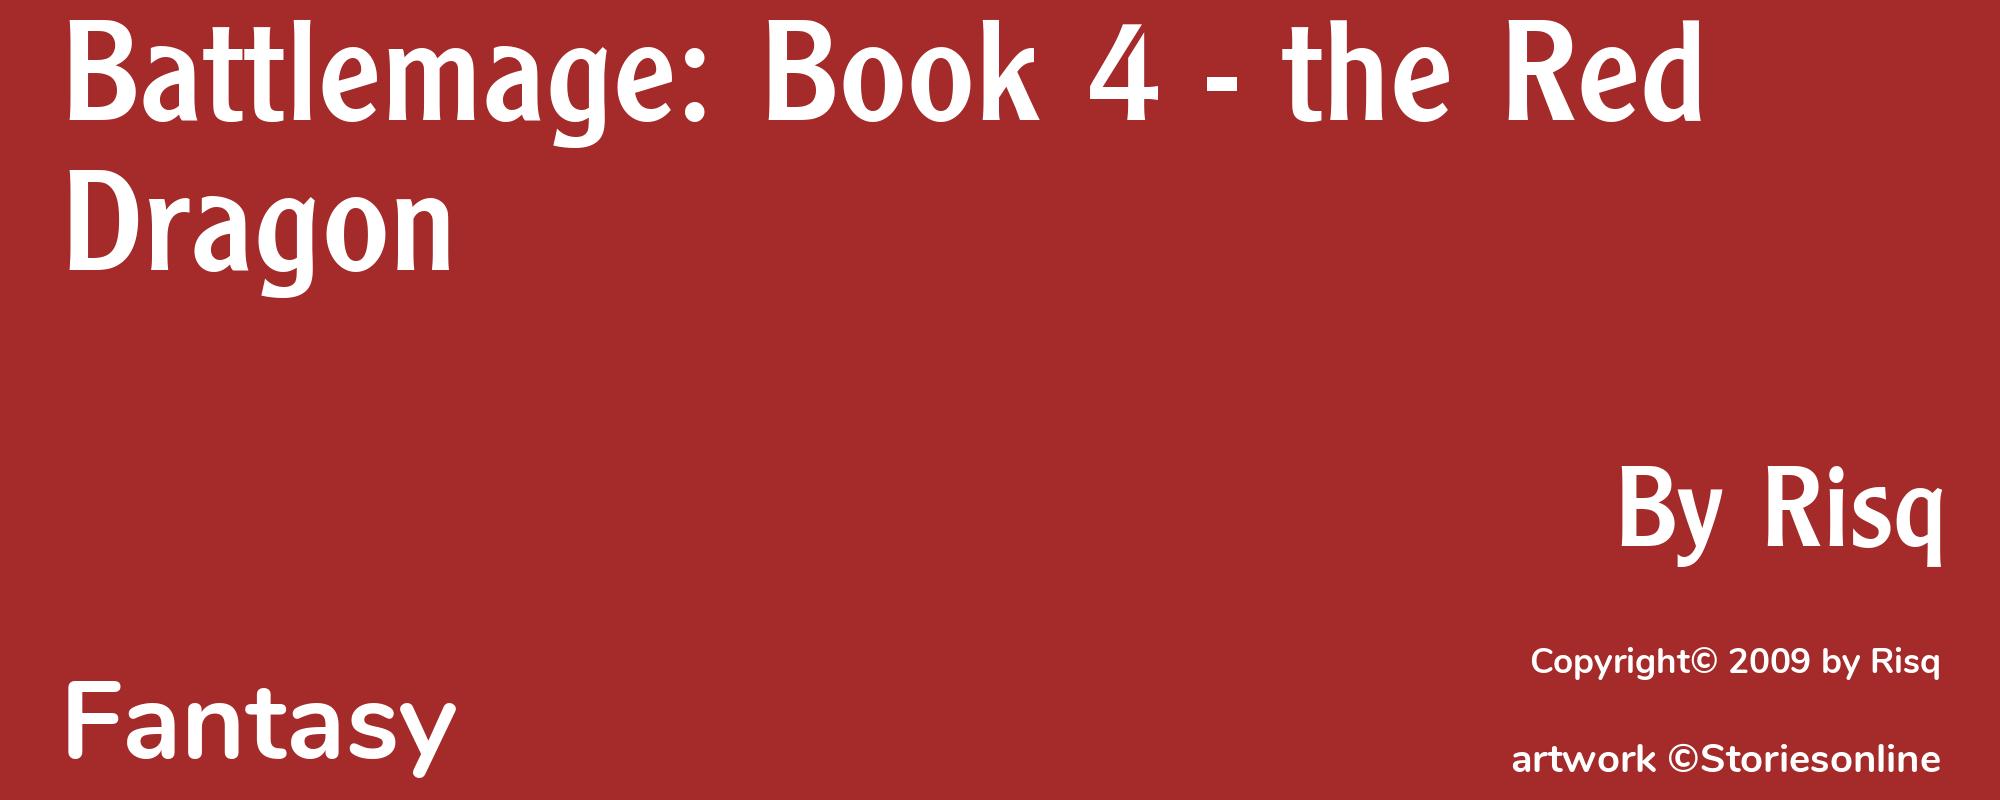 Battlemage: Book 4 - the Red Dragon - Cover